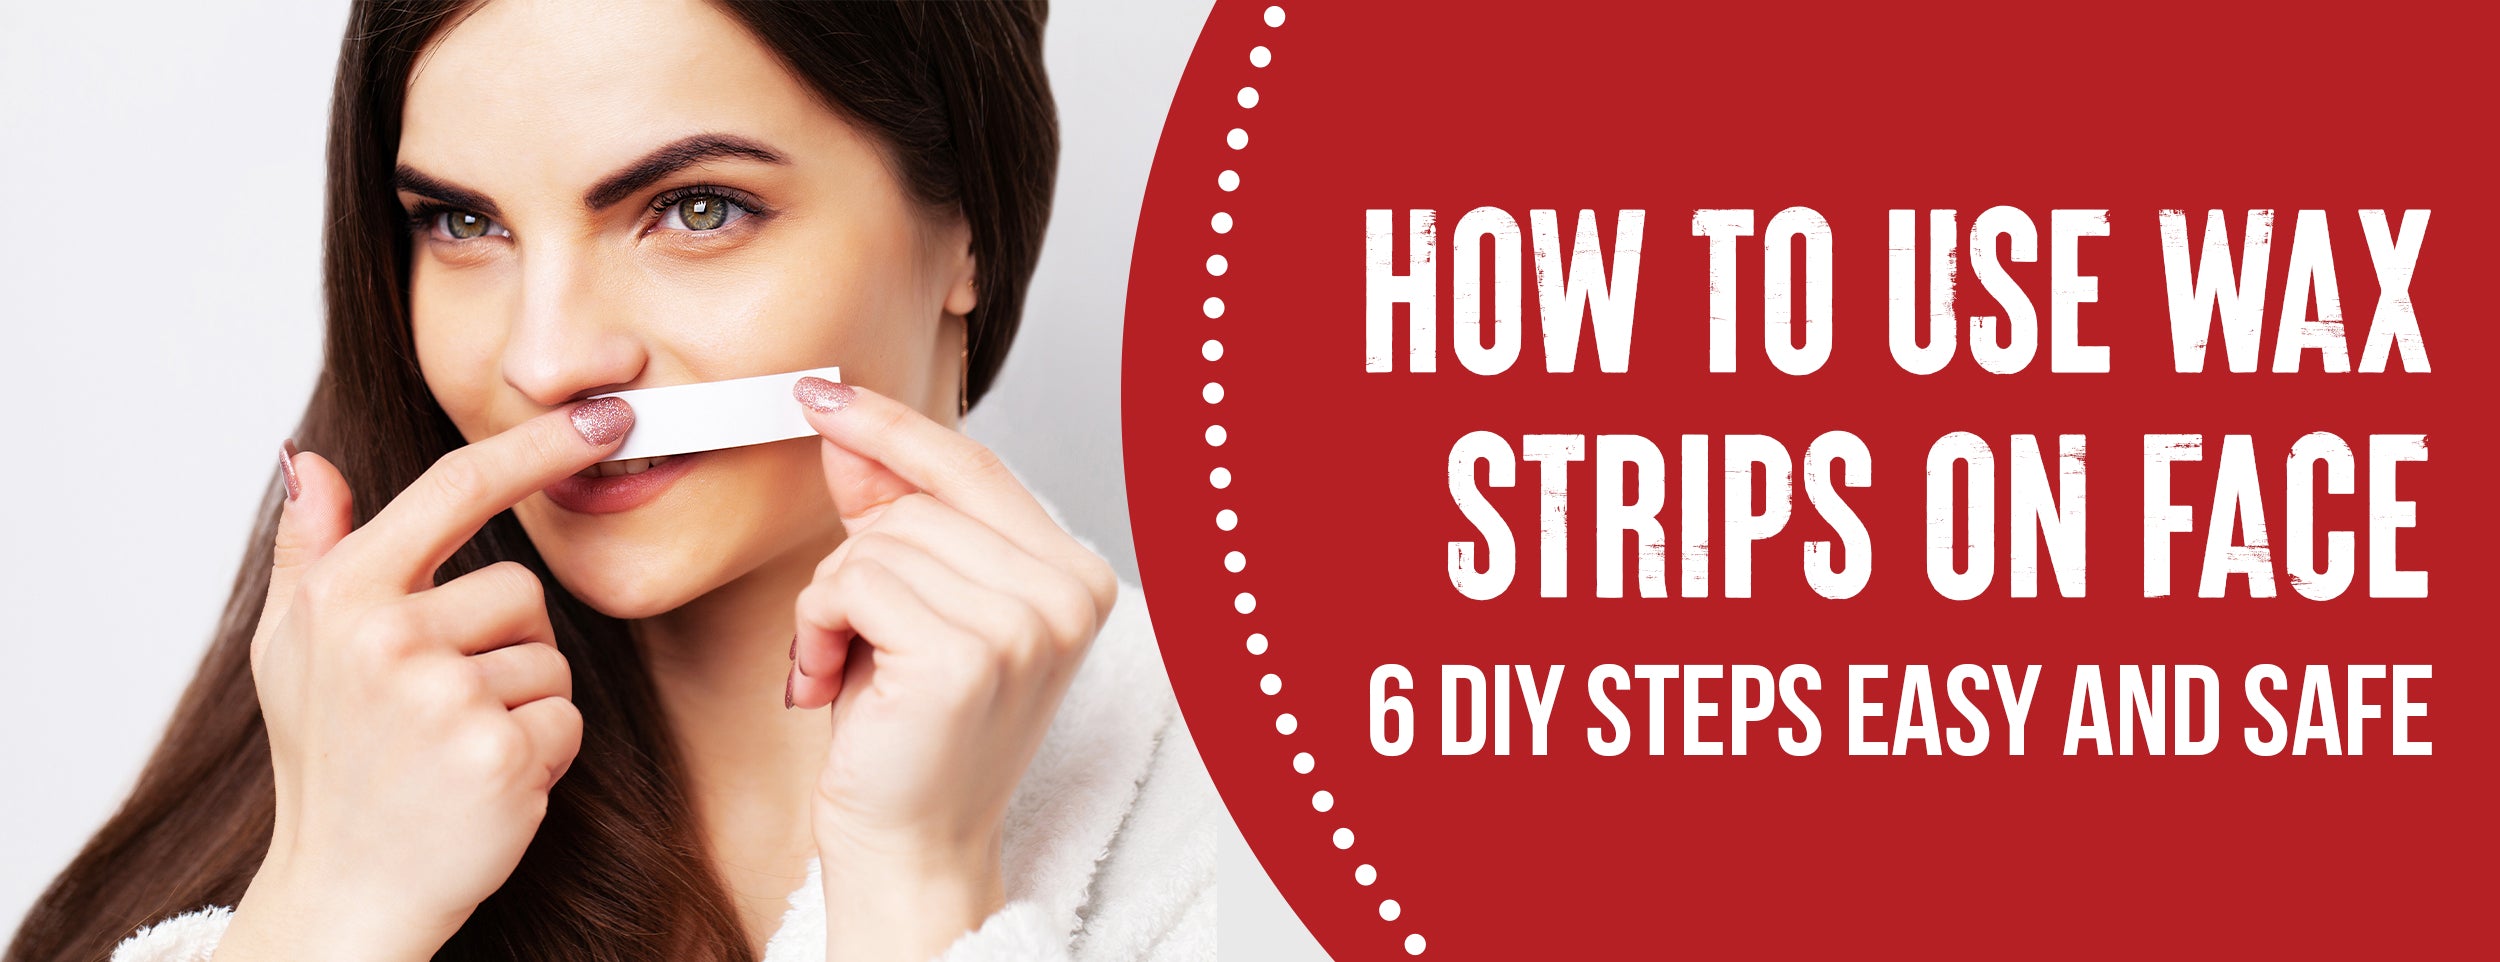 5 Advantages of Using Wax Strips on Face 6 Safely and Effective Tips